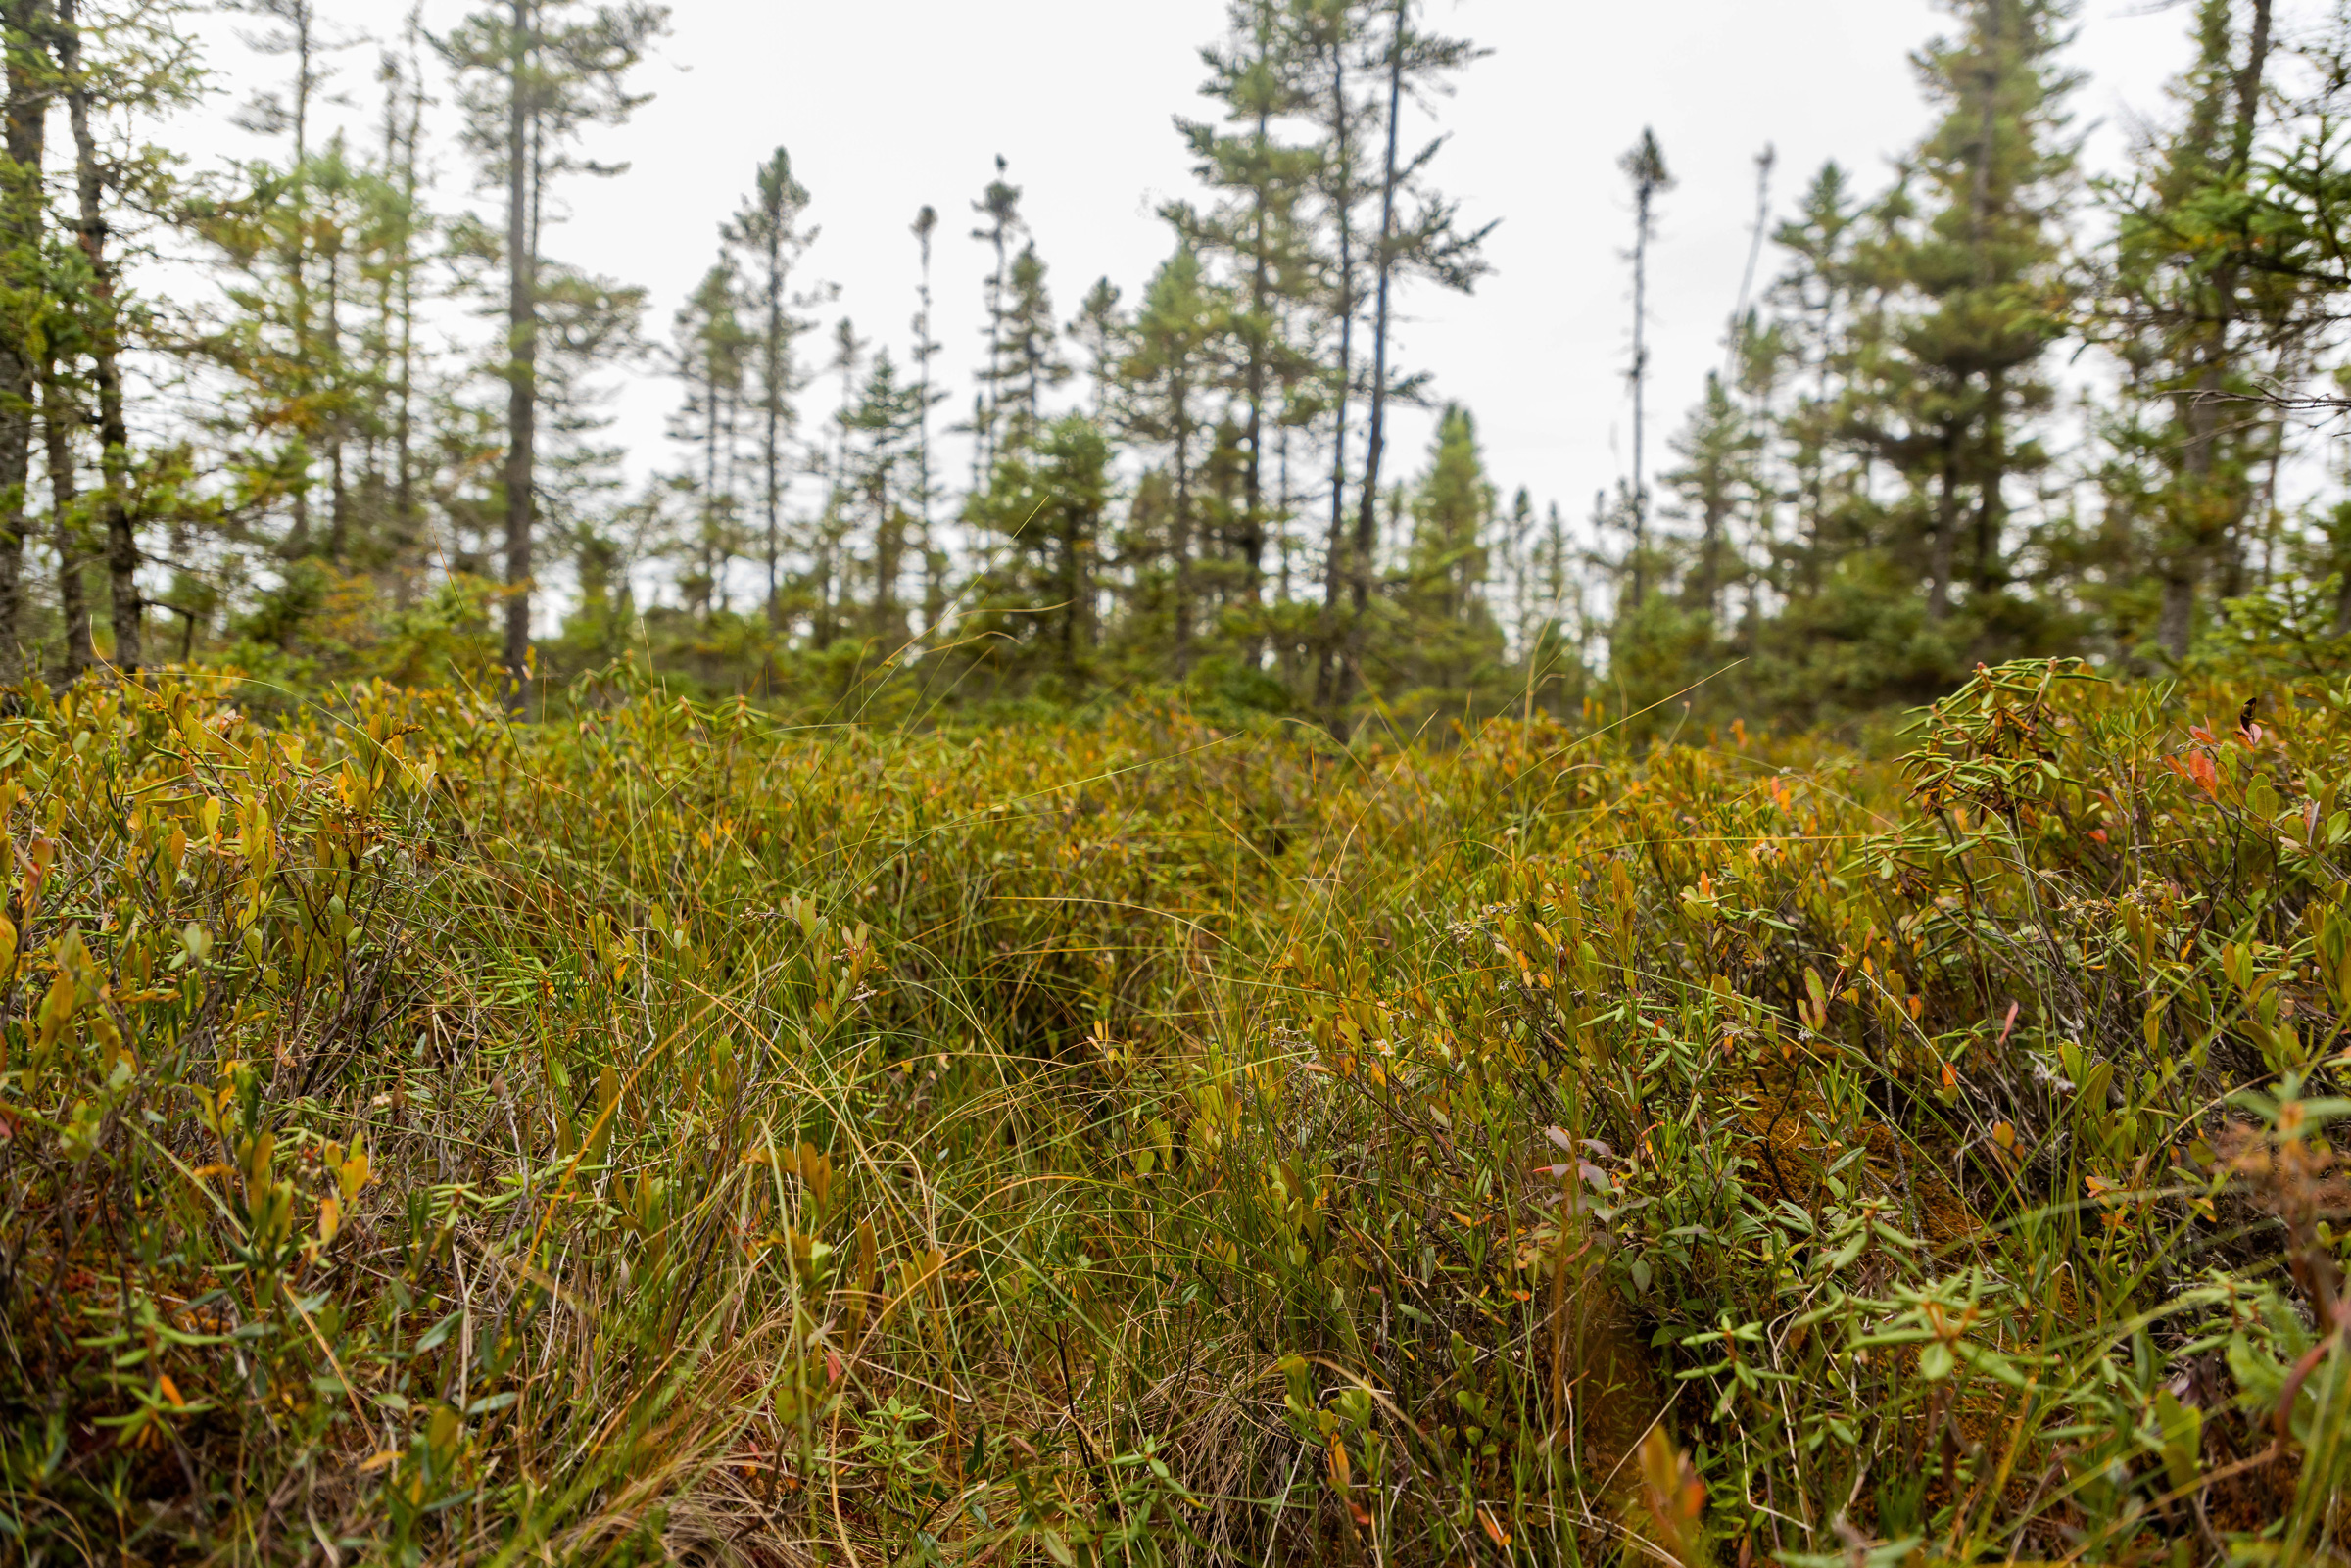 Landscape view of bog plants and small tamarack trees.